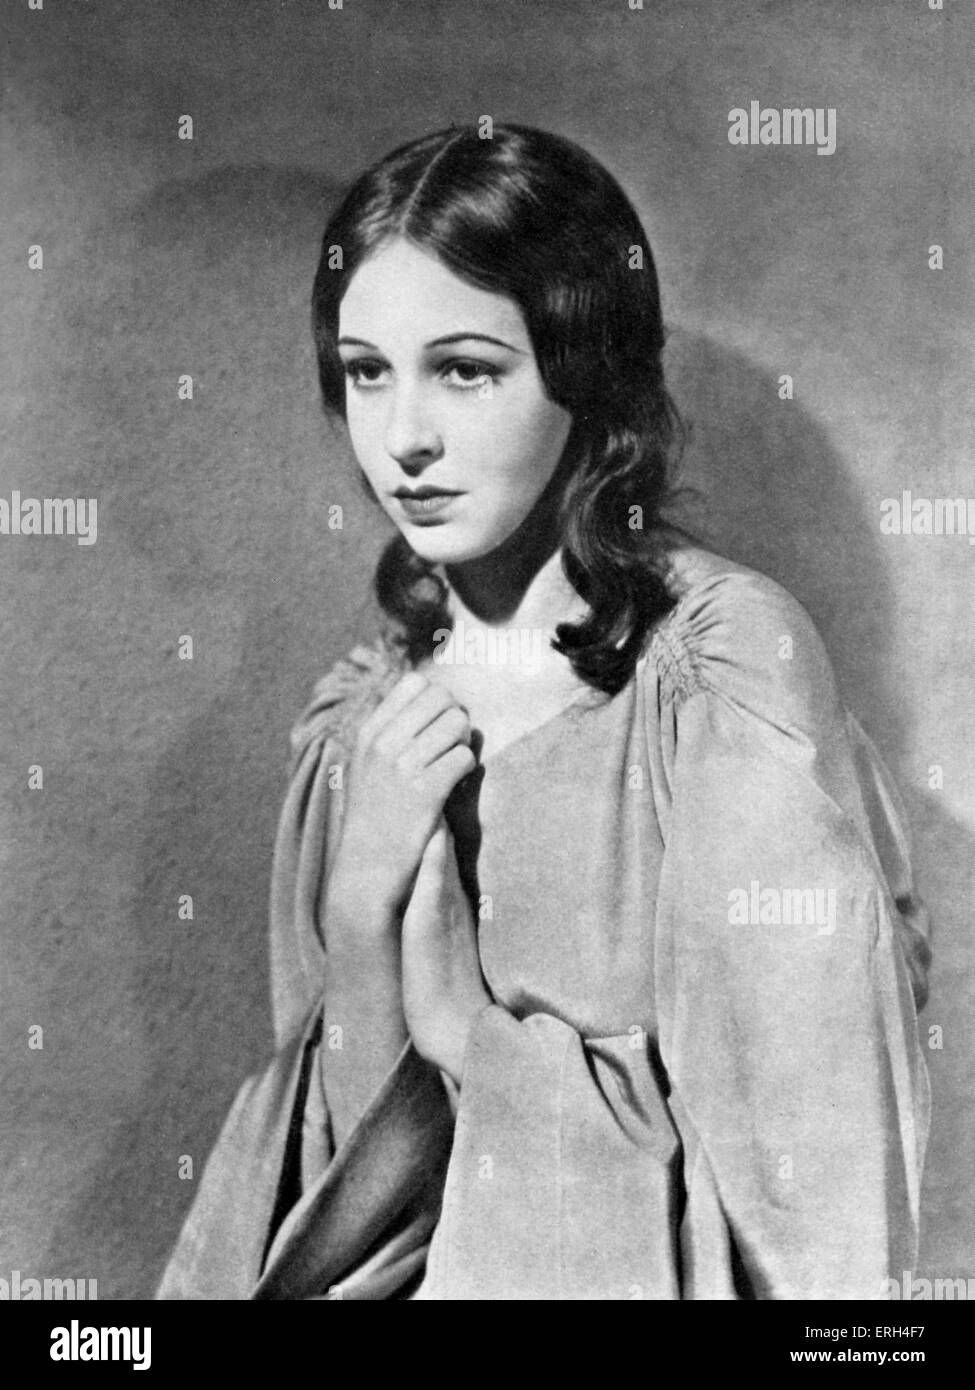 Pamela Ostrer as Naemi from 'Jew Süss, Scenario of the film' based on the book by Lion Feuchtwanger, directed by Lothar Mendes, produced by Gaumont-British Picture Corporation Ltd. Published 1935, film made in 1934. Based on life of Joseph Süß Oppenheimer , German-Jewish financier 1698–1738 Stock Photo